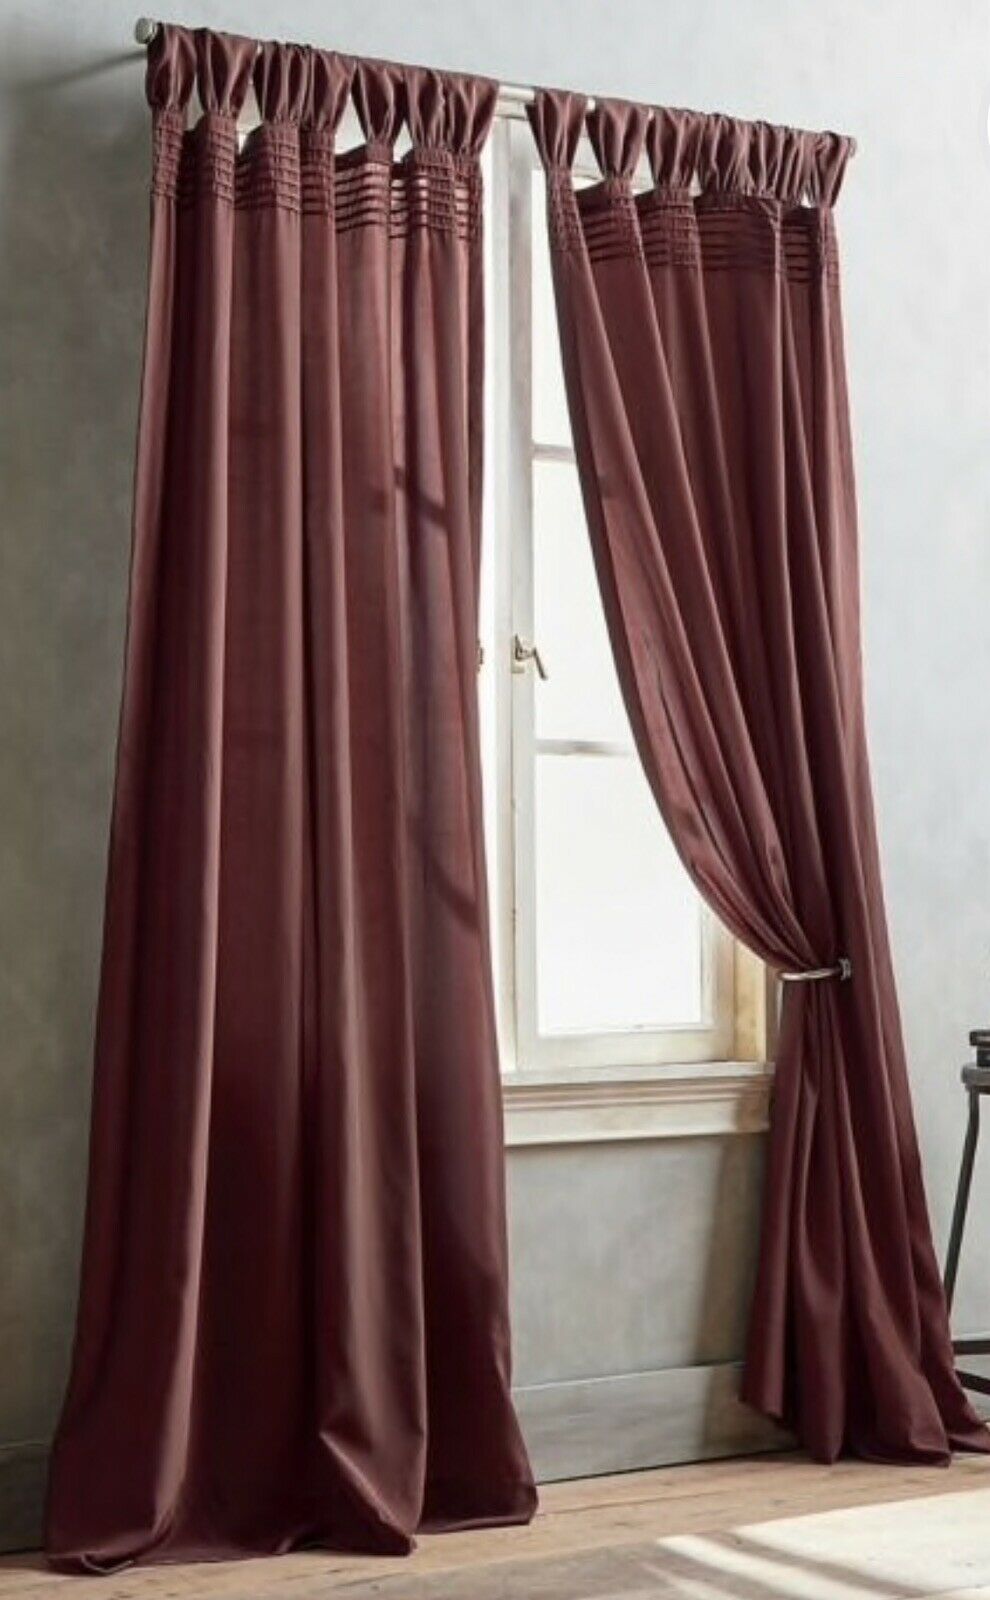 3 New Dkny City Edition Cream Window Curtain Tab Top Pleated Panels 50 X 95” Pertaining To Vue Elements Priya Tab Top Window Curtains (View 15 of 30)